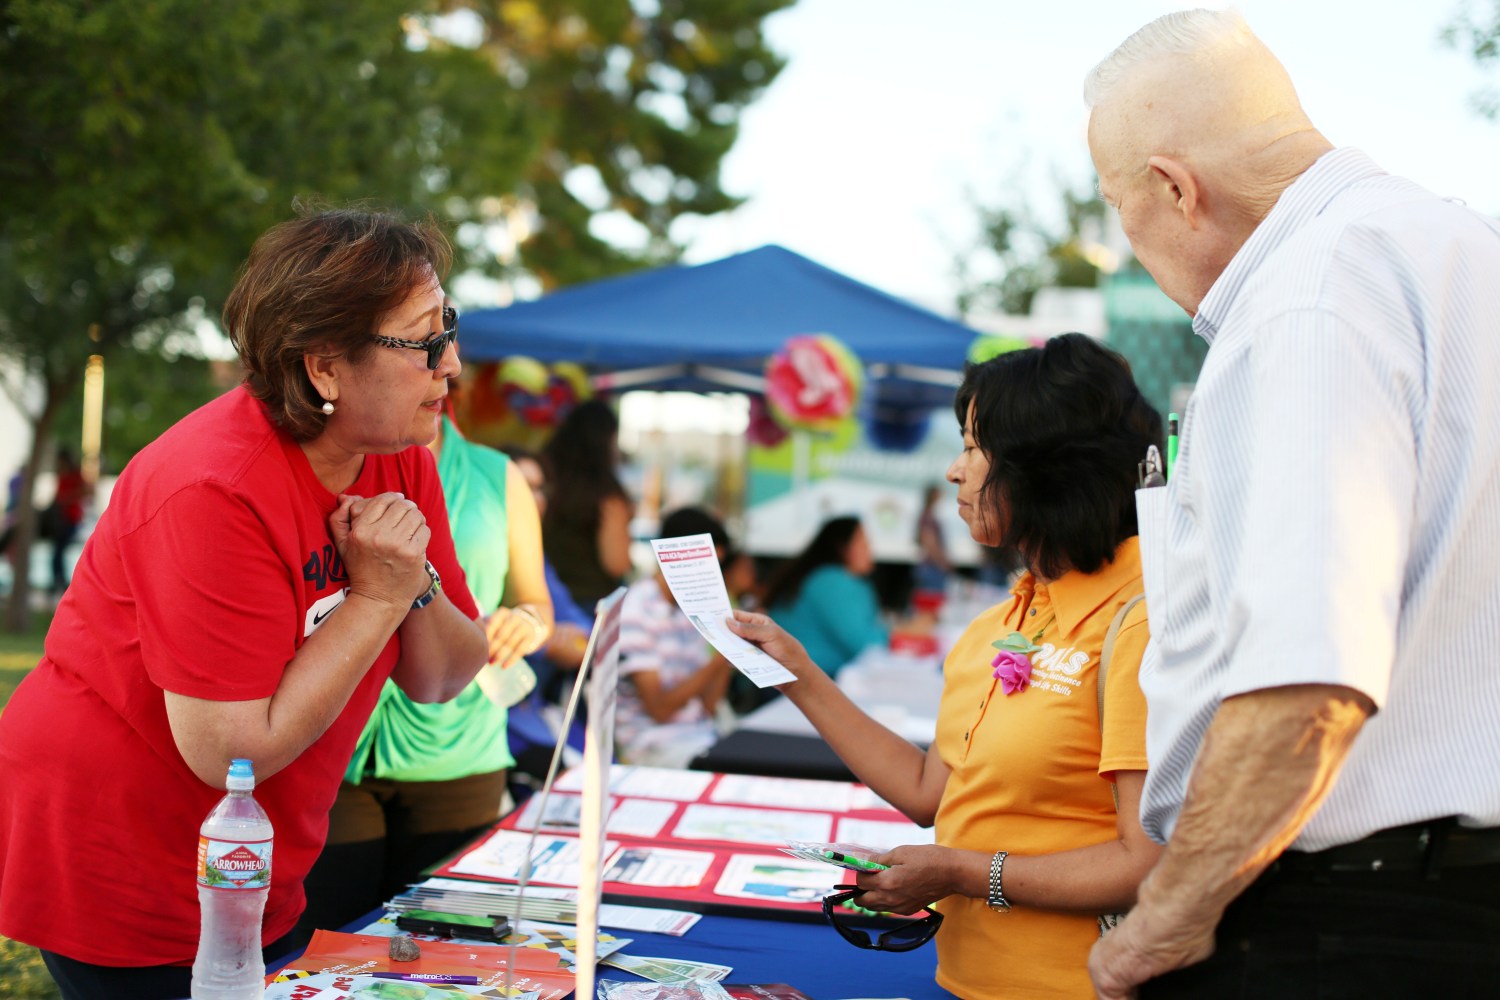 A health insurance navigator explains services at a booth in Arizona